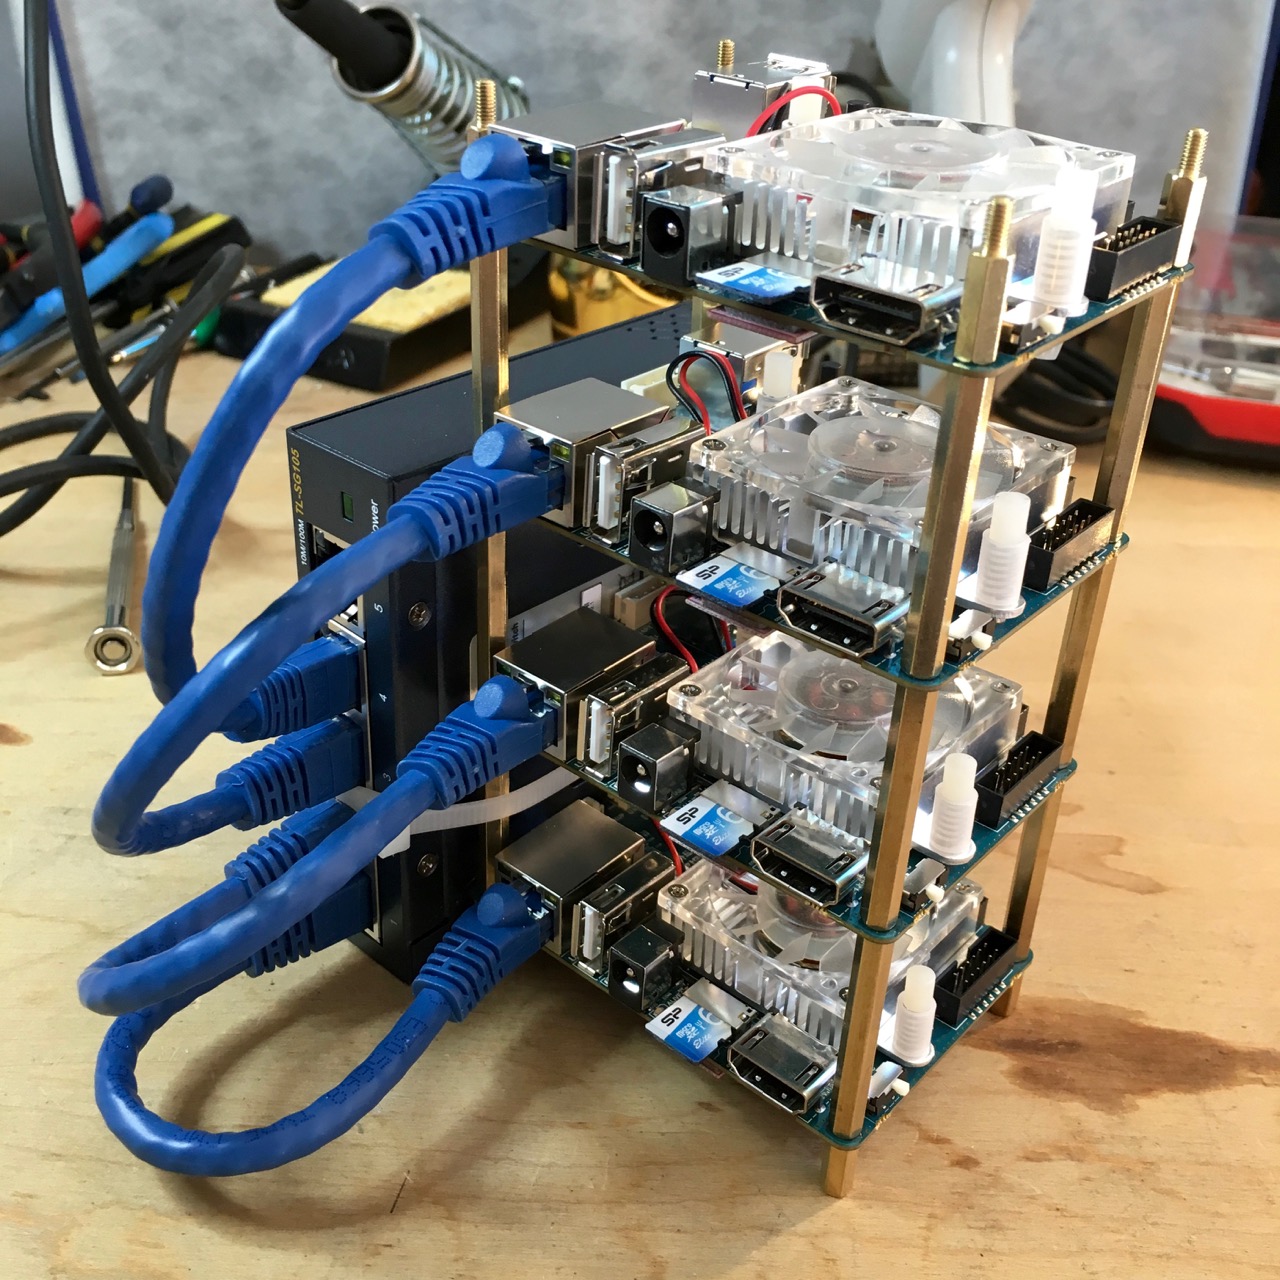 The ODROID XU4 cluster fully assembled